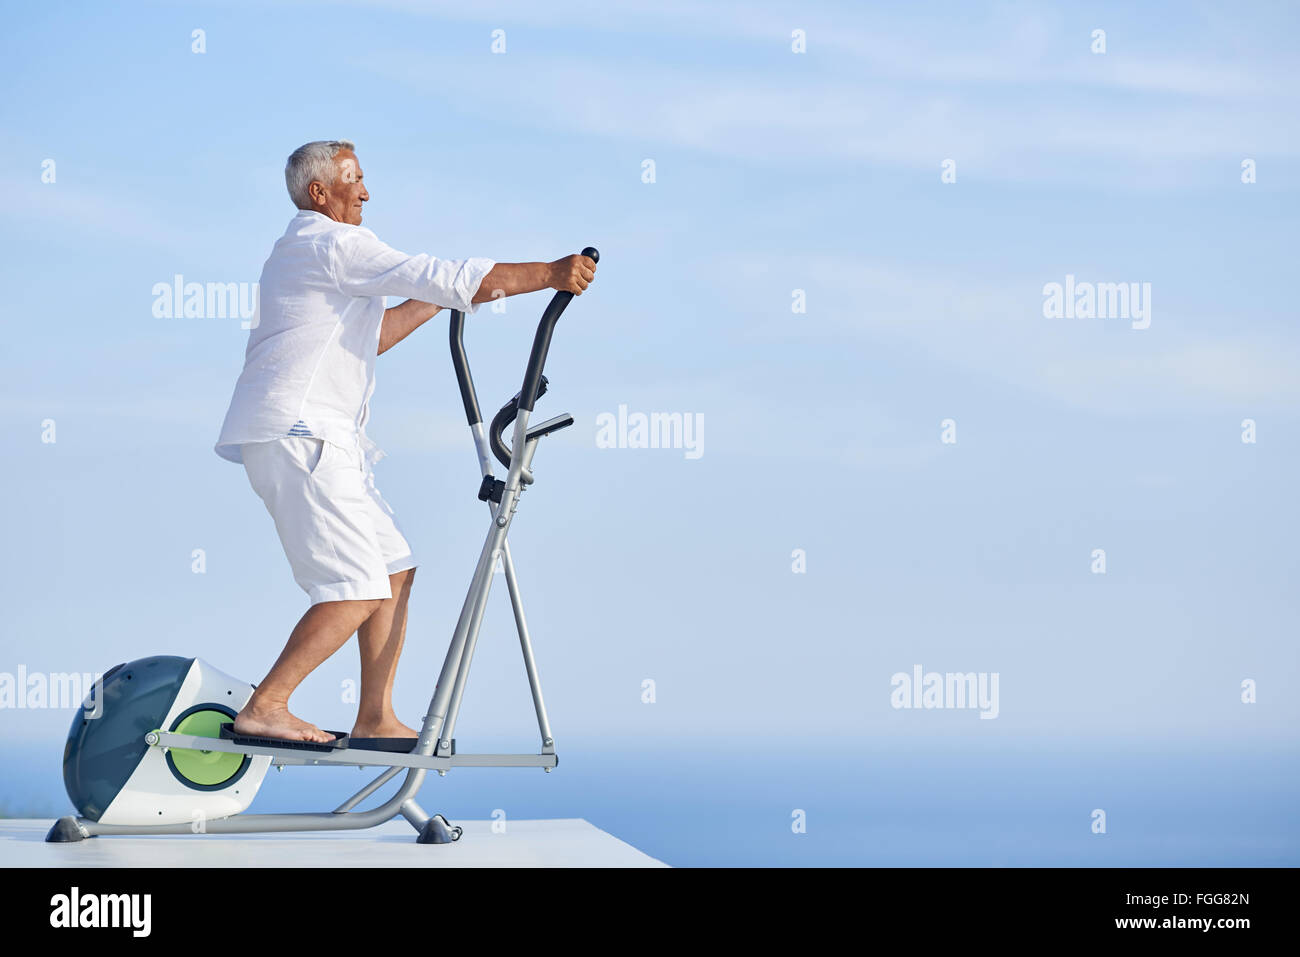 healthy senior man working out Stock Photo